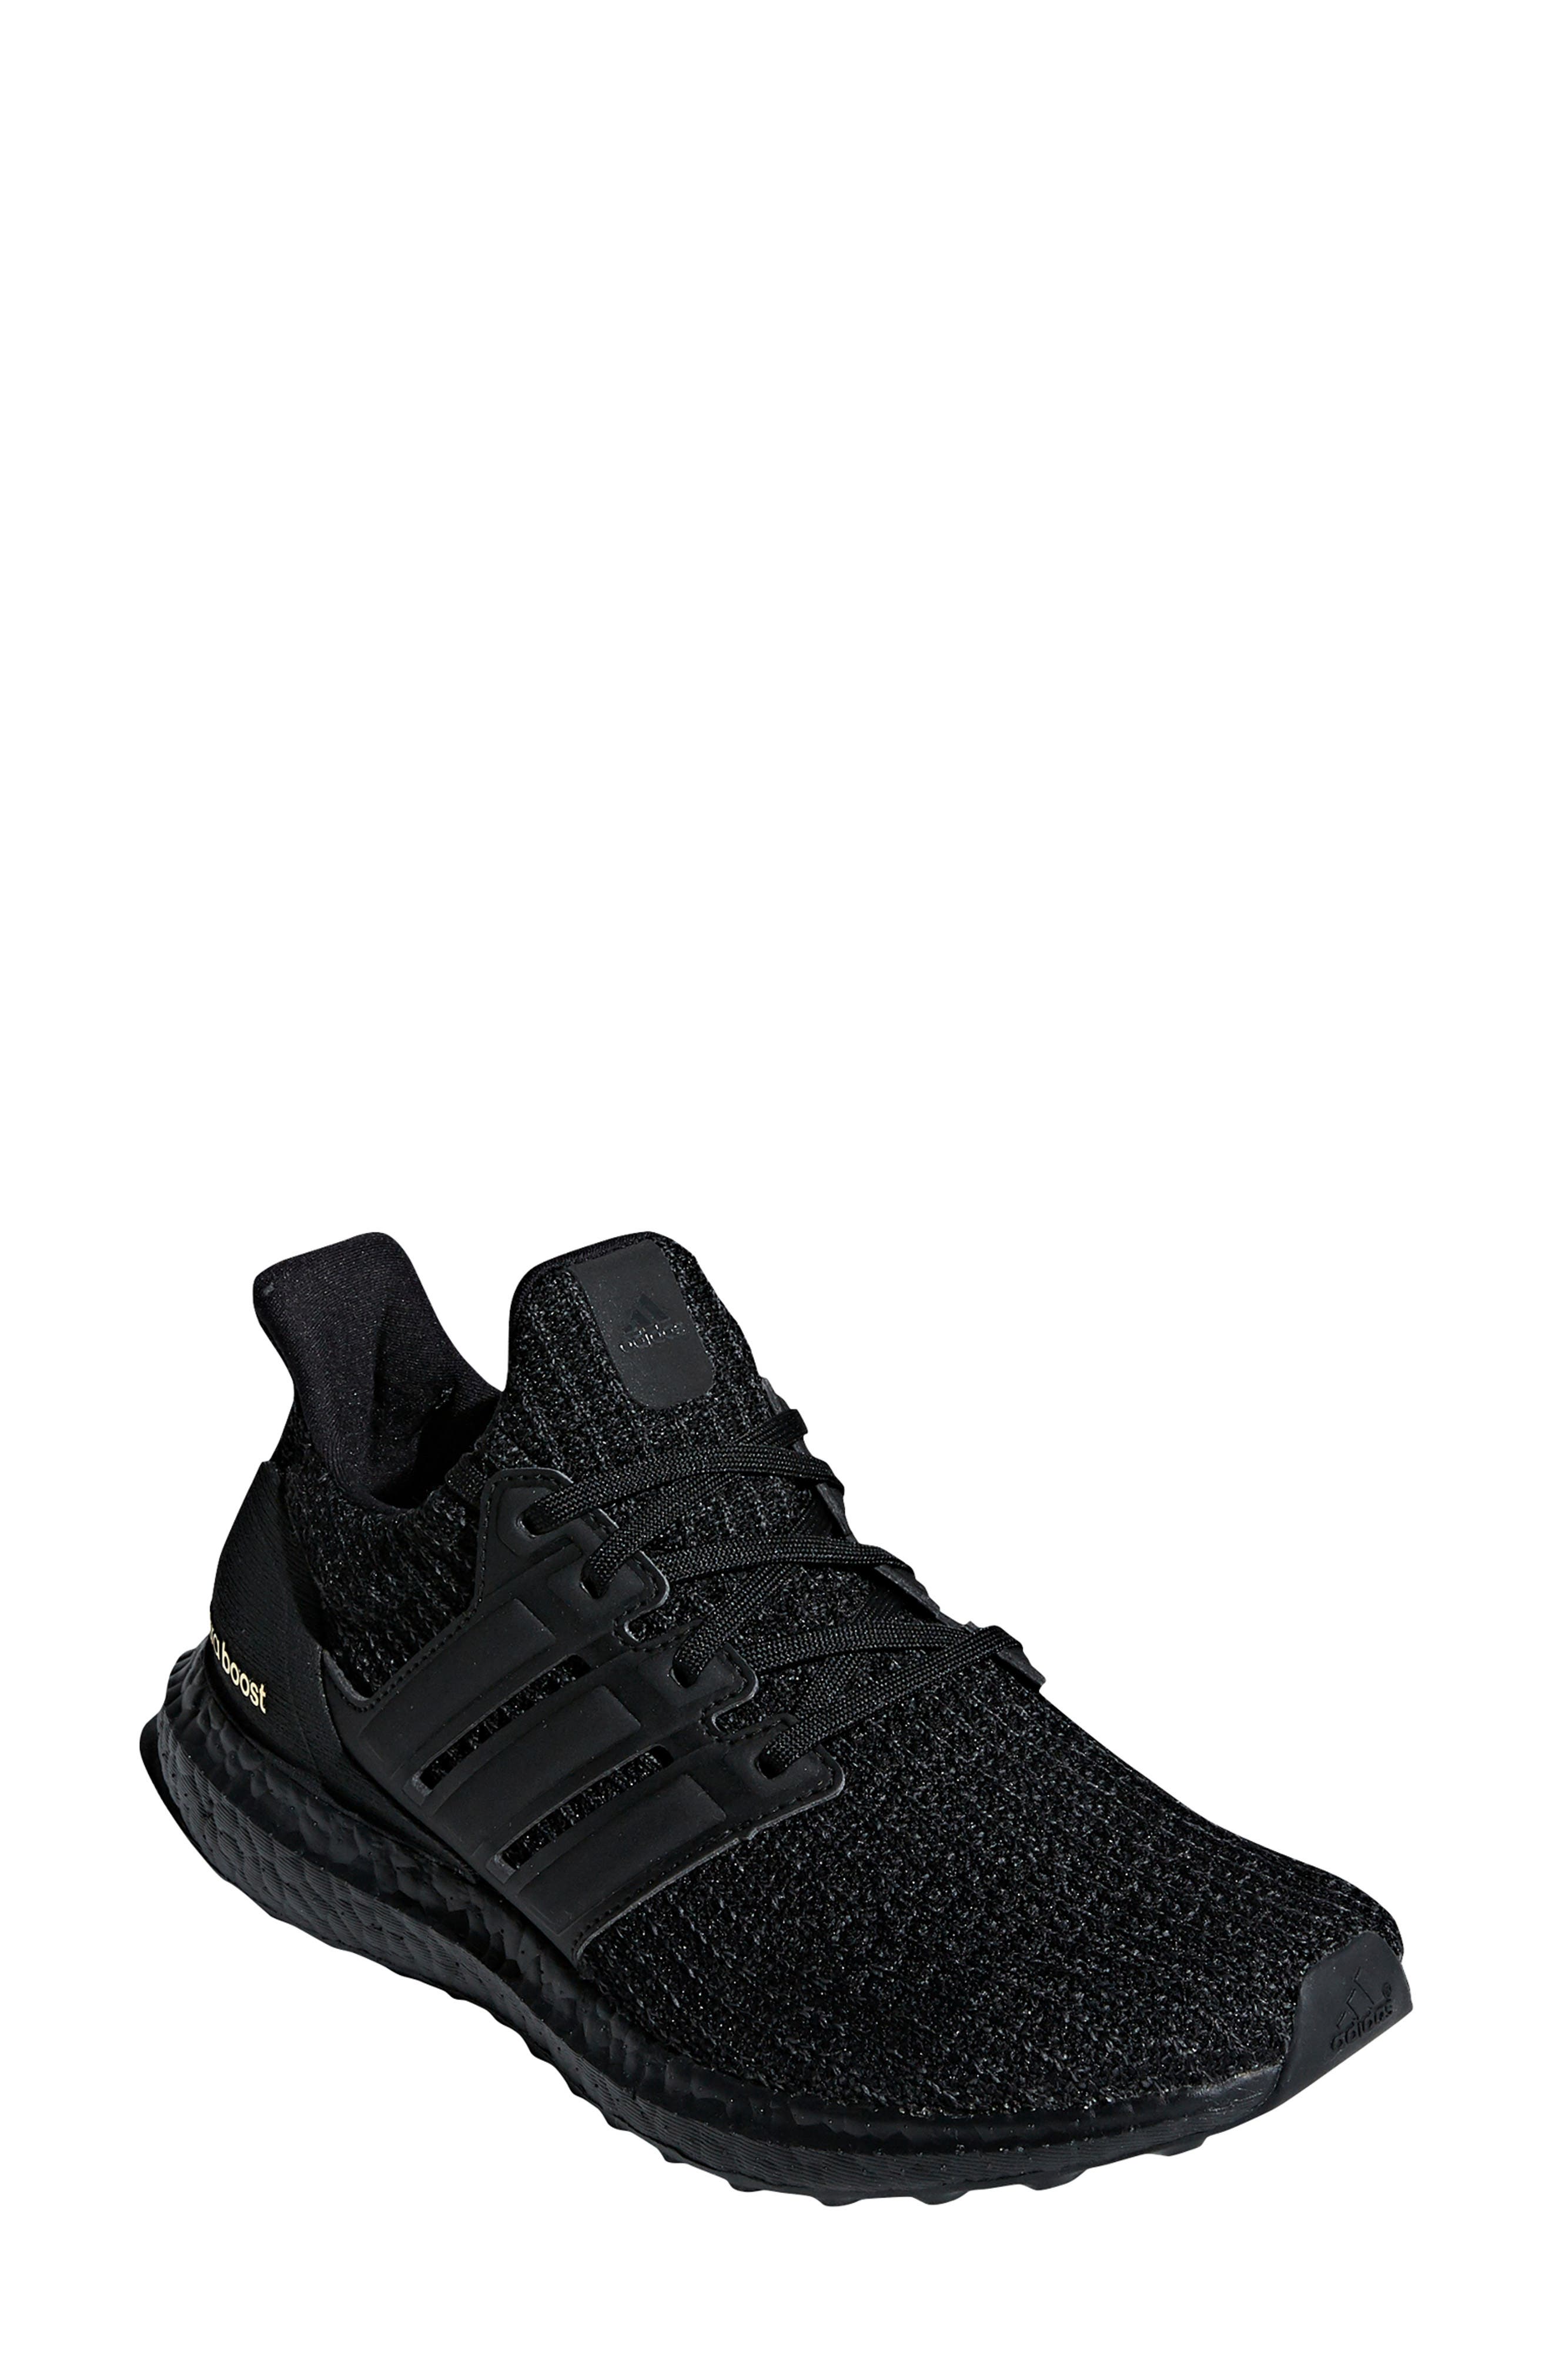 adidas running shoes ultra boost black